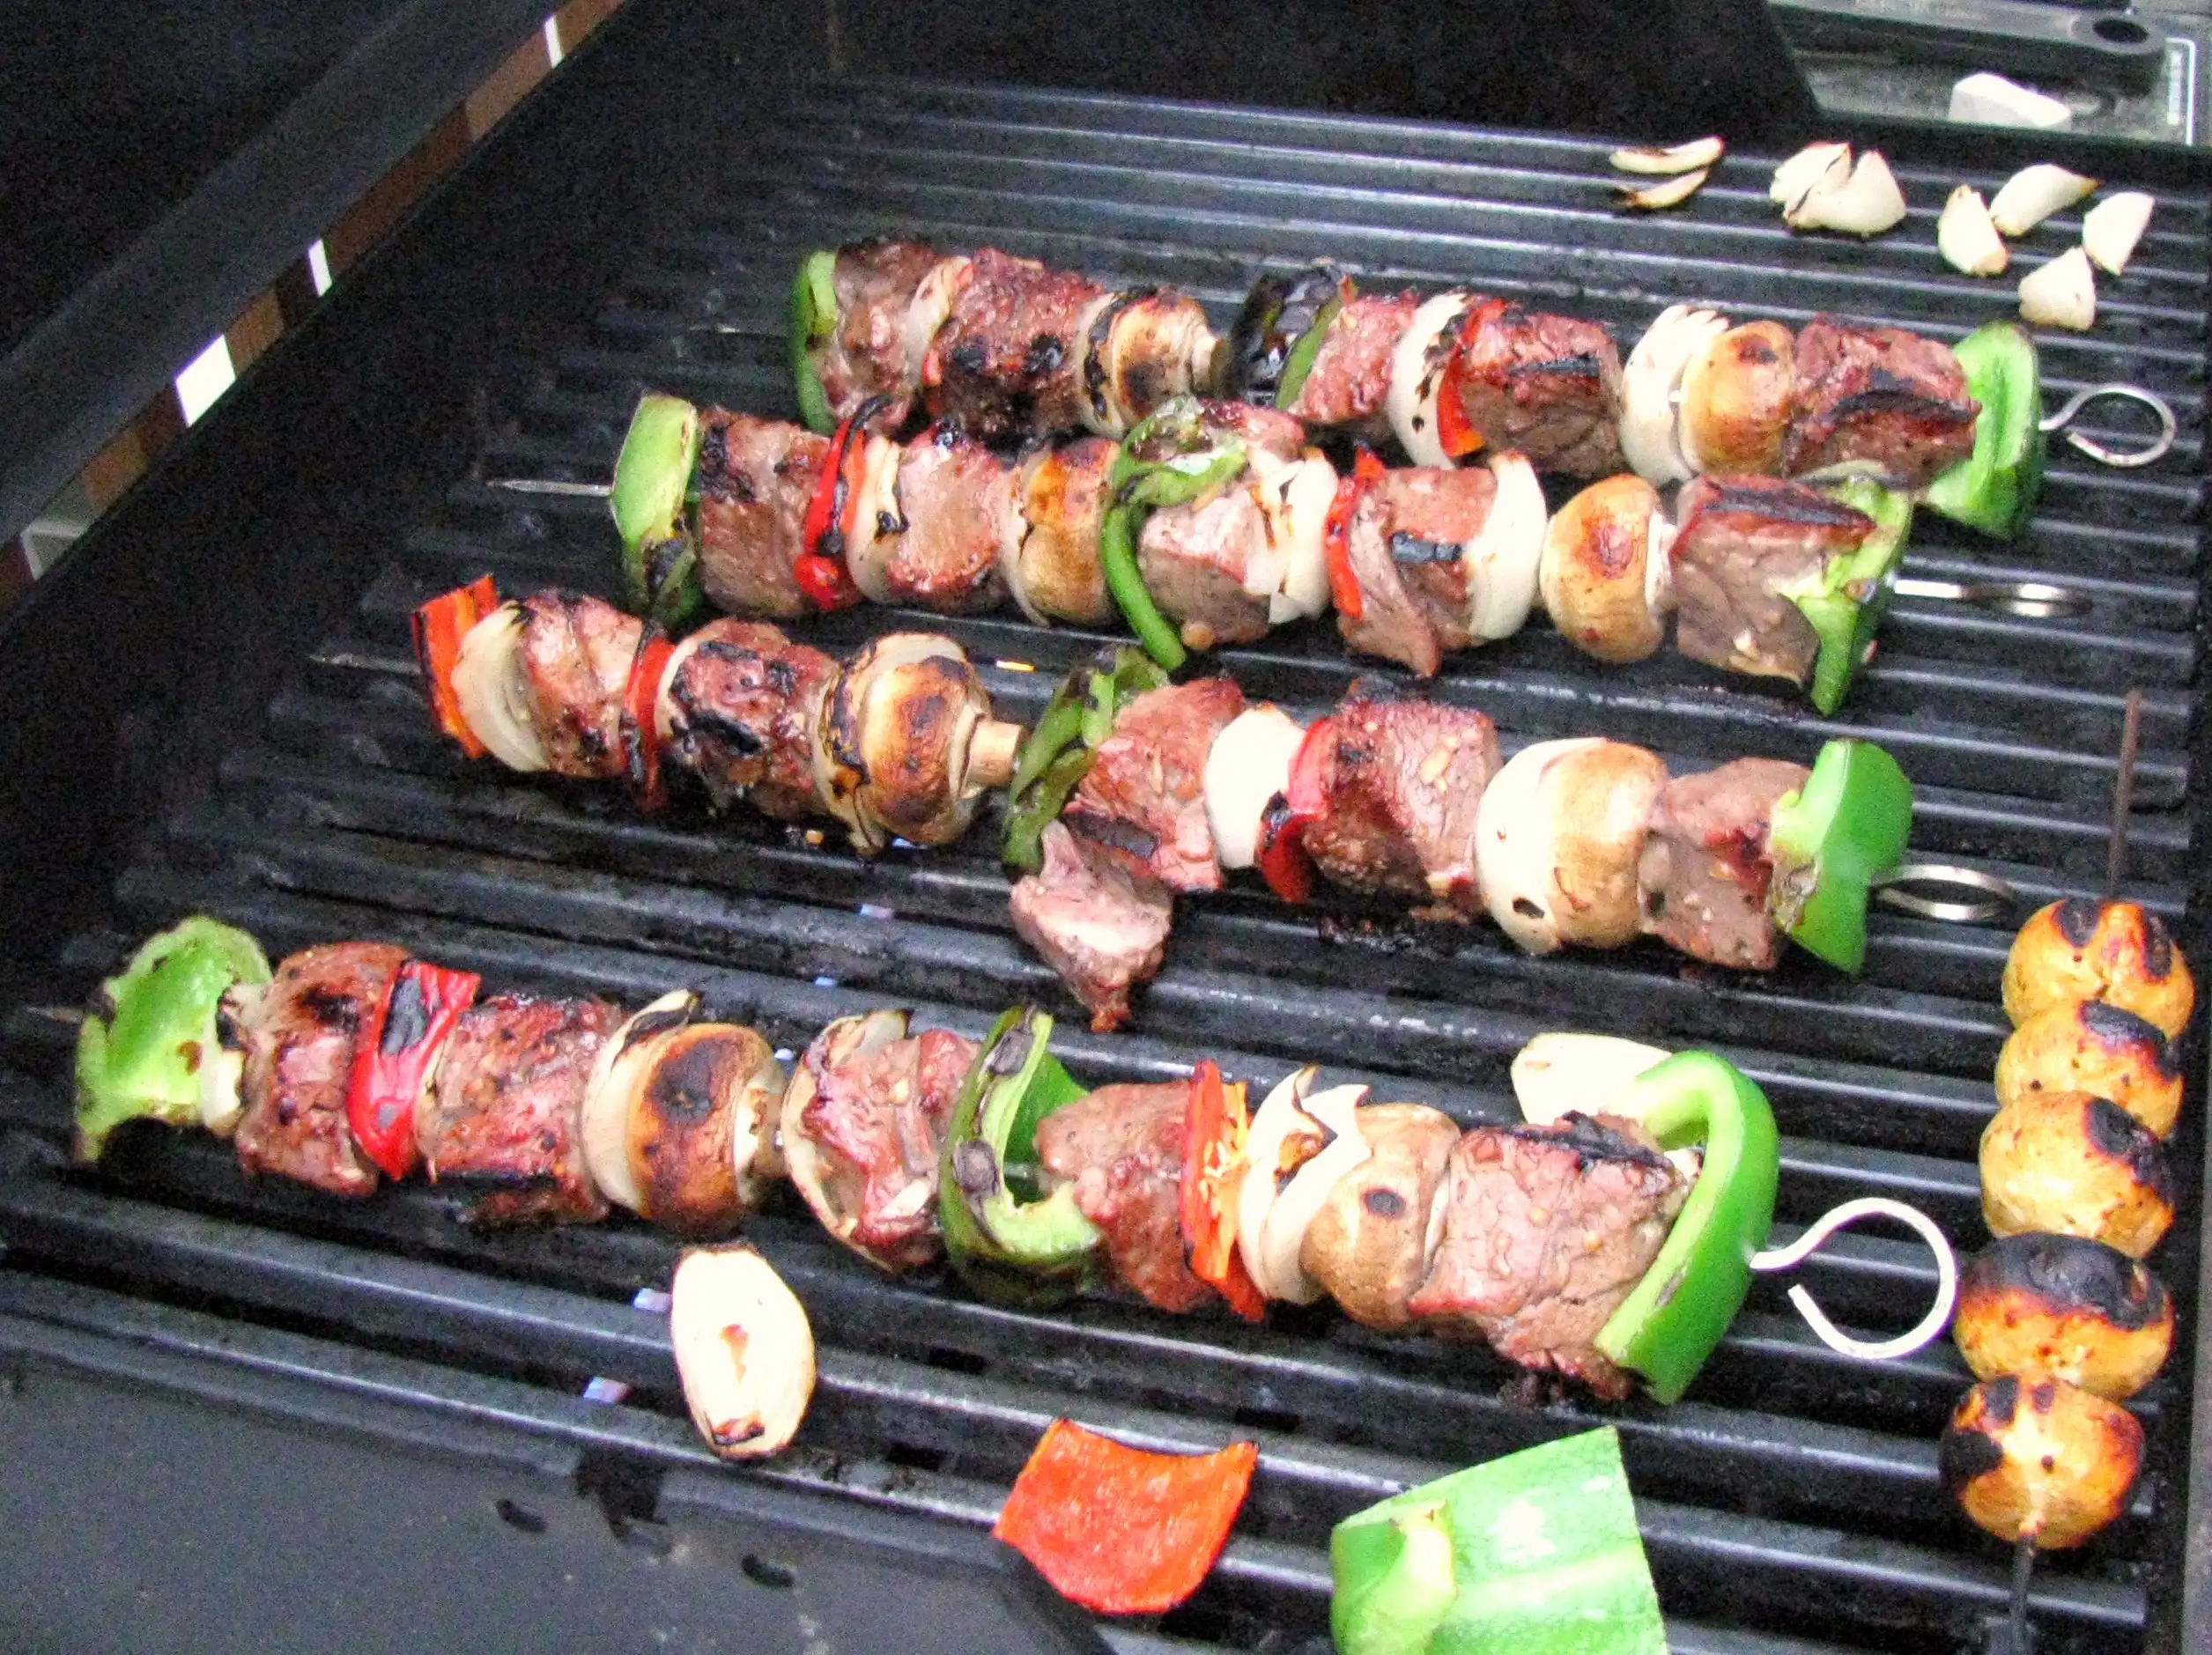 Kebabs on a grill.